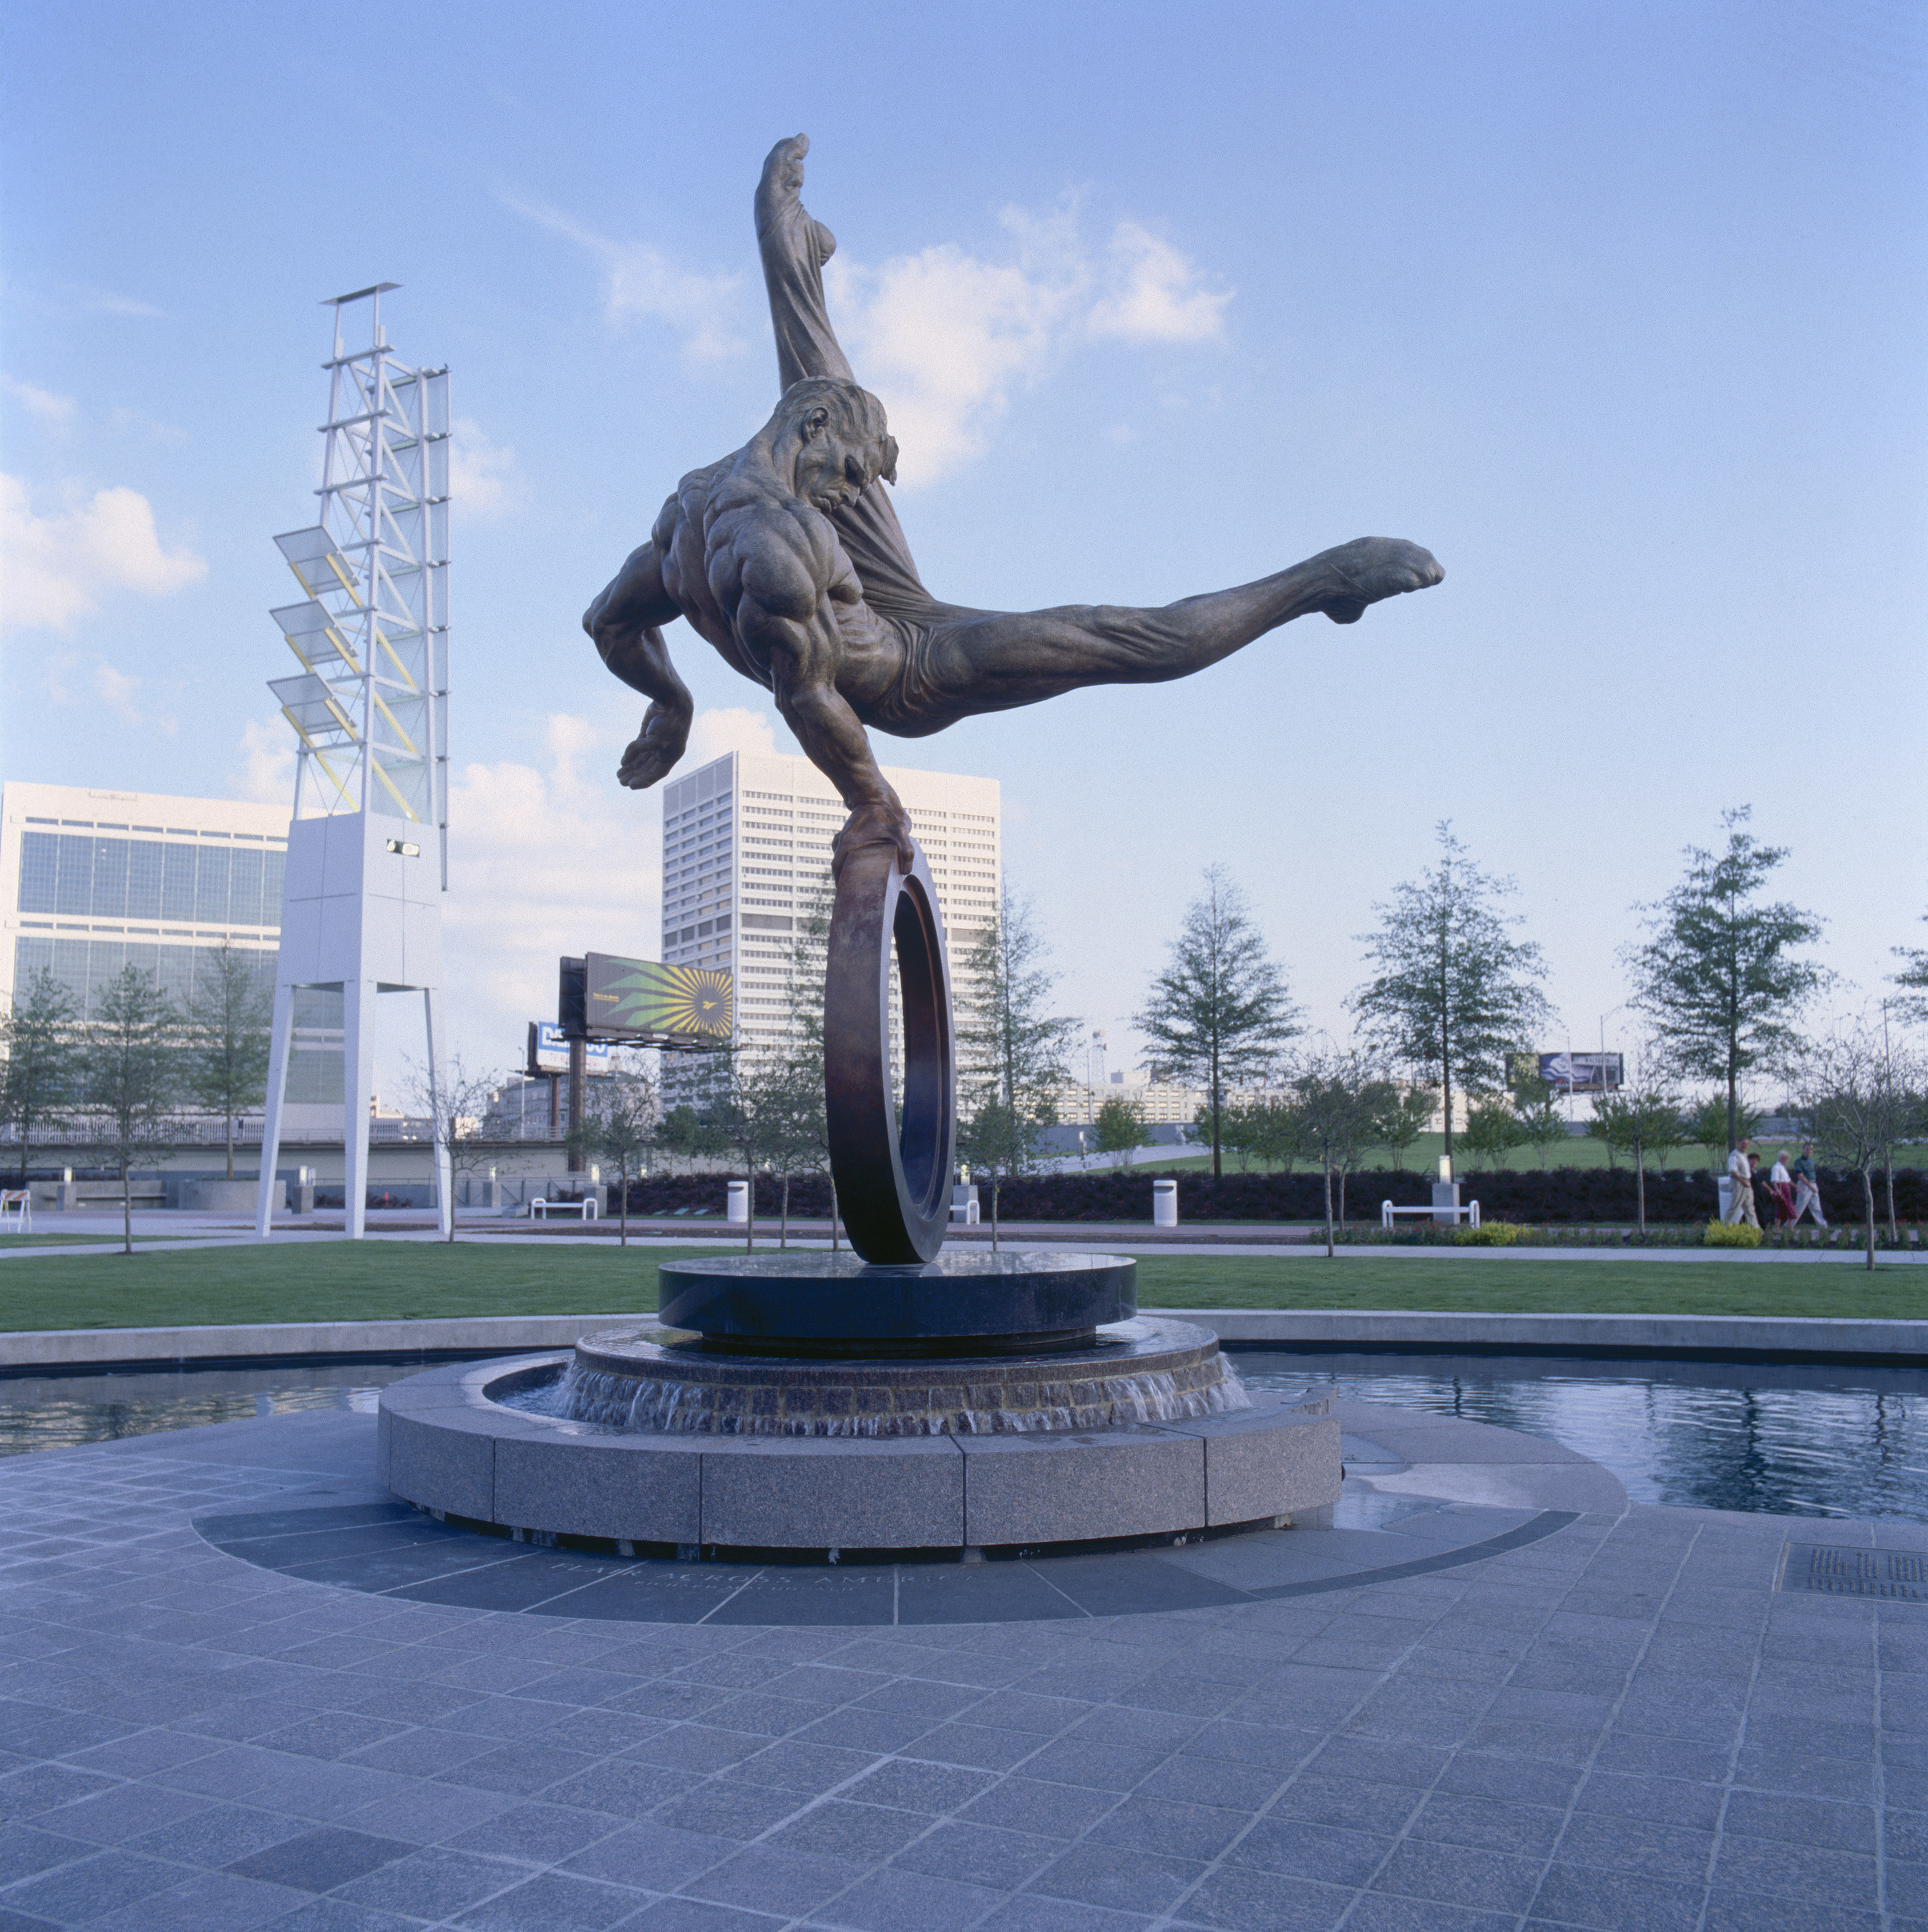 Created for the 1996 Atlanta Olympics, "Flair Across America - The Gymnast" by sculptor Richard MacDonald is a celebration of the triumph of the human spirit - the dedication, tenacity and determination of every individual in the pursuit of excellence. Flair Across America is a the 26-foot high heroic bronze monument that resides permanently at Georgia International Plaza in Atlanta, Georgia.